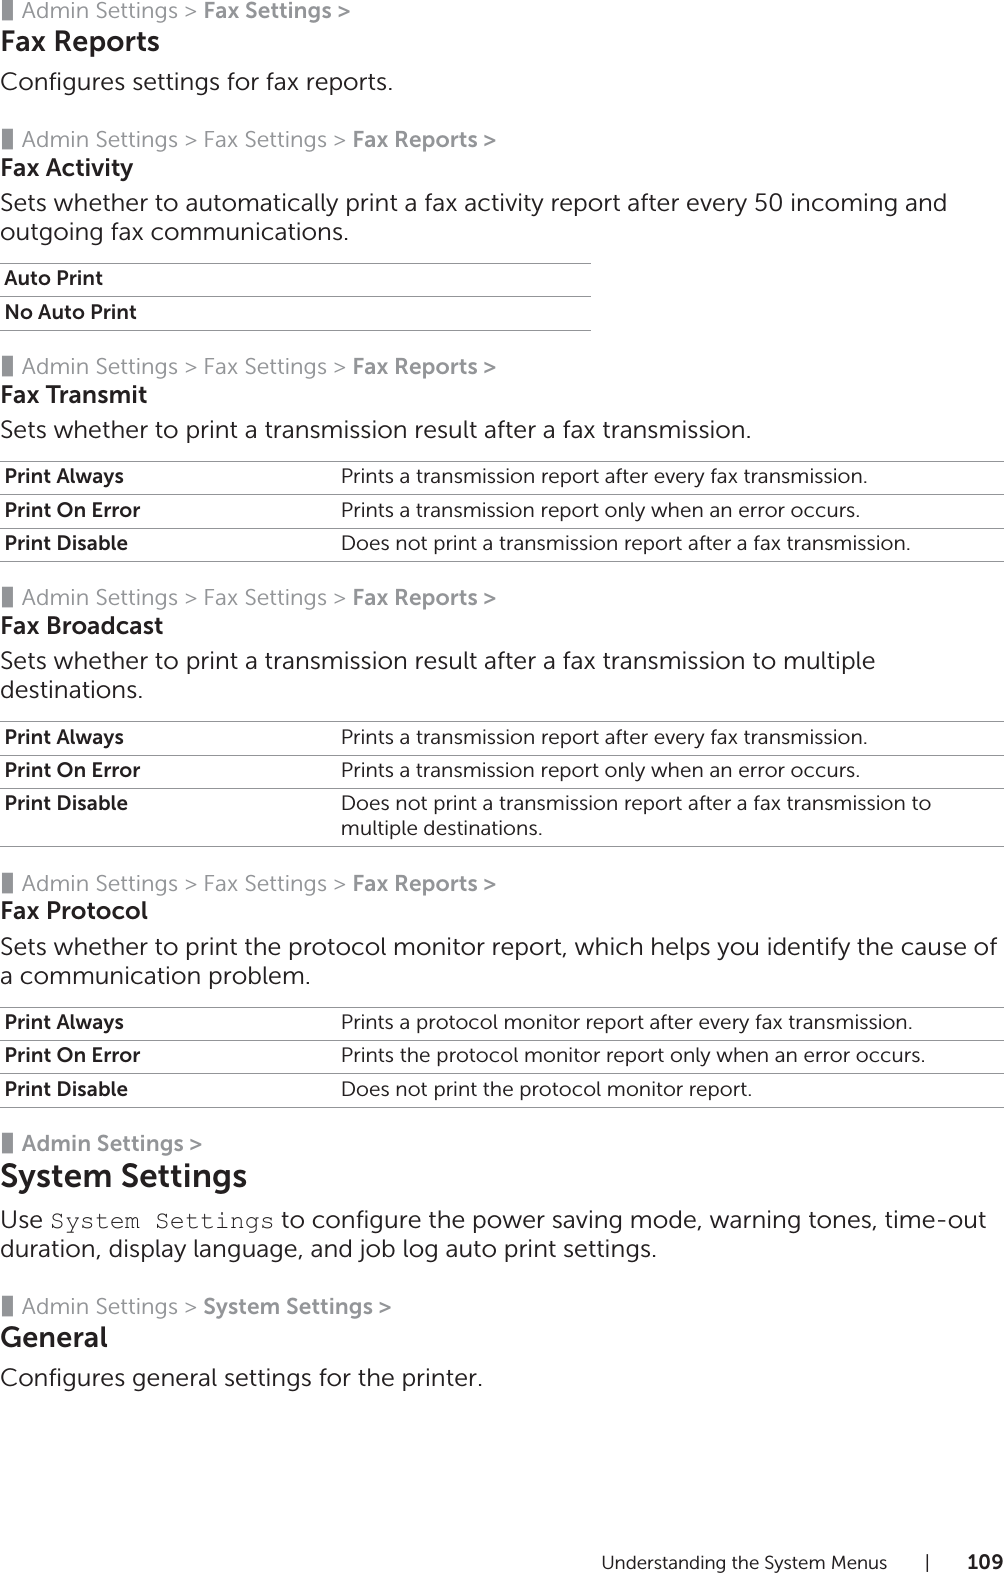 Understanding the System Menus |109❚Admin Settings &gt; Fax Settings &gt;Fax ReportsConfigures settings for fax reports.❚Admin Settings &gt; Fax Settings &gt; Fax Reports &gt;Fax ActivitySets whether to automatically print a fax activity report after every 50 incoming and outgoing fax communications.❚Admin Settings &gt; Fax Settings &gt; Fax Reports &gt;Fax TransmitSets whether to print a transmission result after a fax transmission.❚Admin Settings &gt; Fax Settings &gt; Fax Reports &gt;Fax BroadcastSets whether to print a transmission result after a fax transmission to multiple destinations.❚Admin Settings &gt; Fax Settings &gt; Fax Reports &gt;Fax ProtocolSets whether to print the protocol monitor report, which helps you identify the cause of a communication problem.❚Admin Settings &gt;System SettingsUse System Settings to configure the power saving mode, warning tones, time-out duration, display language, and job log auto print settings.❚Admin Settings &gt; System Settings &gt;GeneralConfigures general settings for the printer.Auto PrintNo Auto PrintPrint Always Prints a transmission report after every fax transmission.Print On Error Prints a transmission report only when an error occurs.Print Disable Does not print a transmission report after a fax transmission.Print Always Prints a transmission report after every fax transmission.Print On Error Prints a transmission report only when an error occurs.Print Disable Does not print a transmission report after a fax transmission to multiple destinations.Print Always Prints a protocol monitor report after every fax transmission.Print On Error Prints the protocol monitor report only when an error occurs.Print Disable Does not print the protocol monitor report.